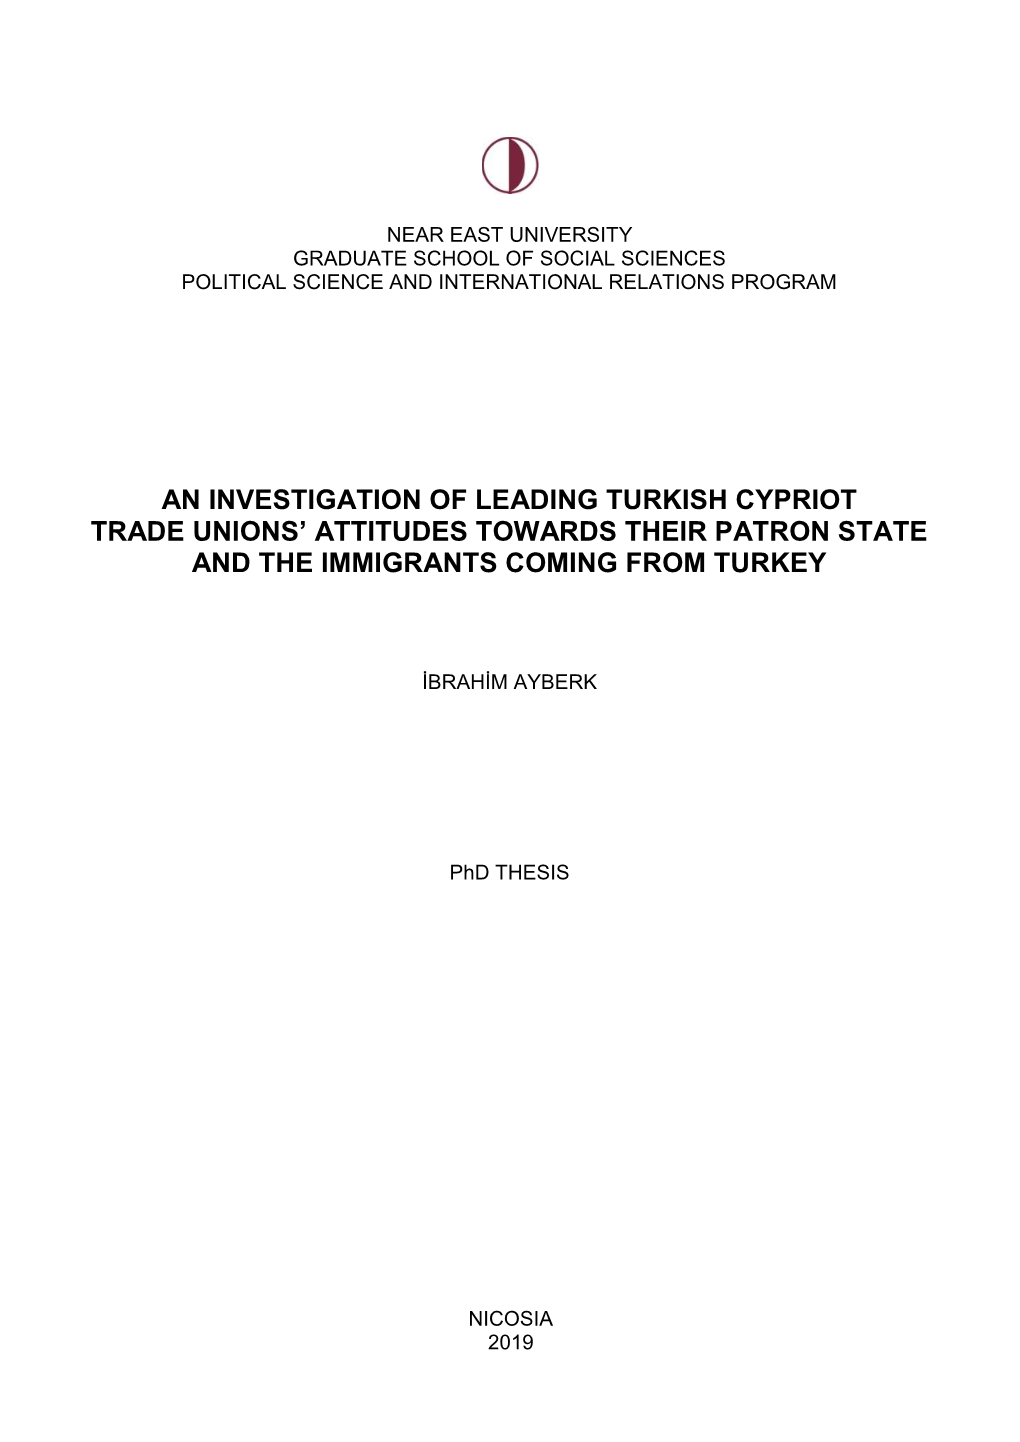 An Investigation of Leading Turkish Cypriot Trade Unions’ Attitudes Towards Their Patron State